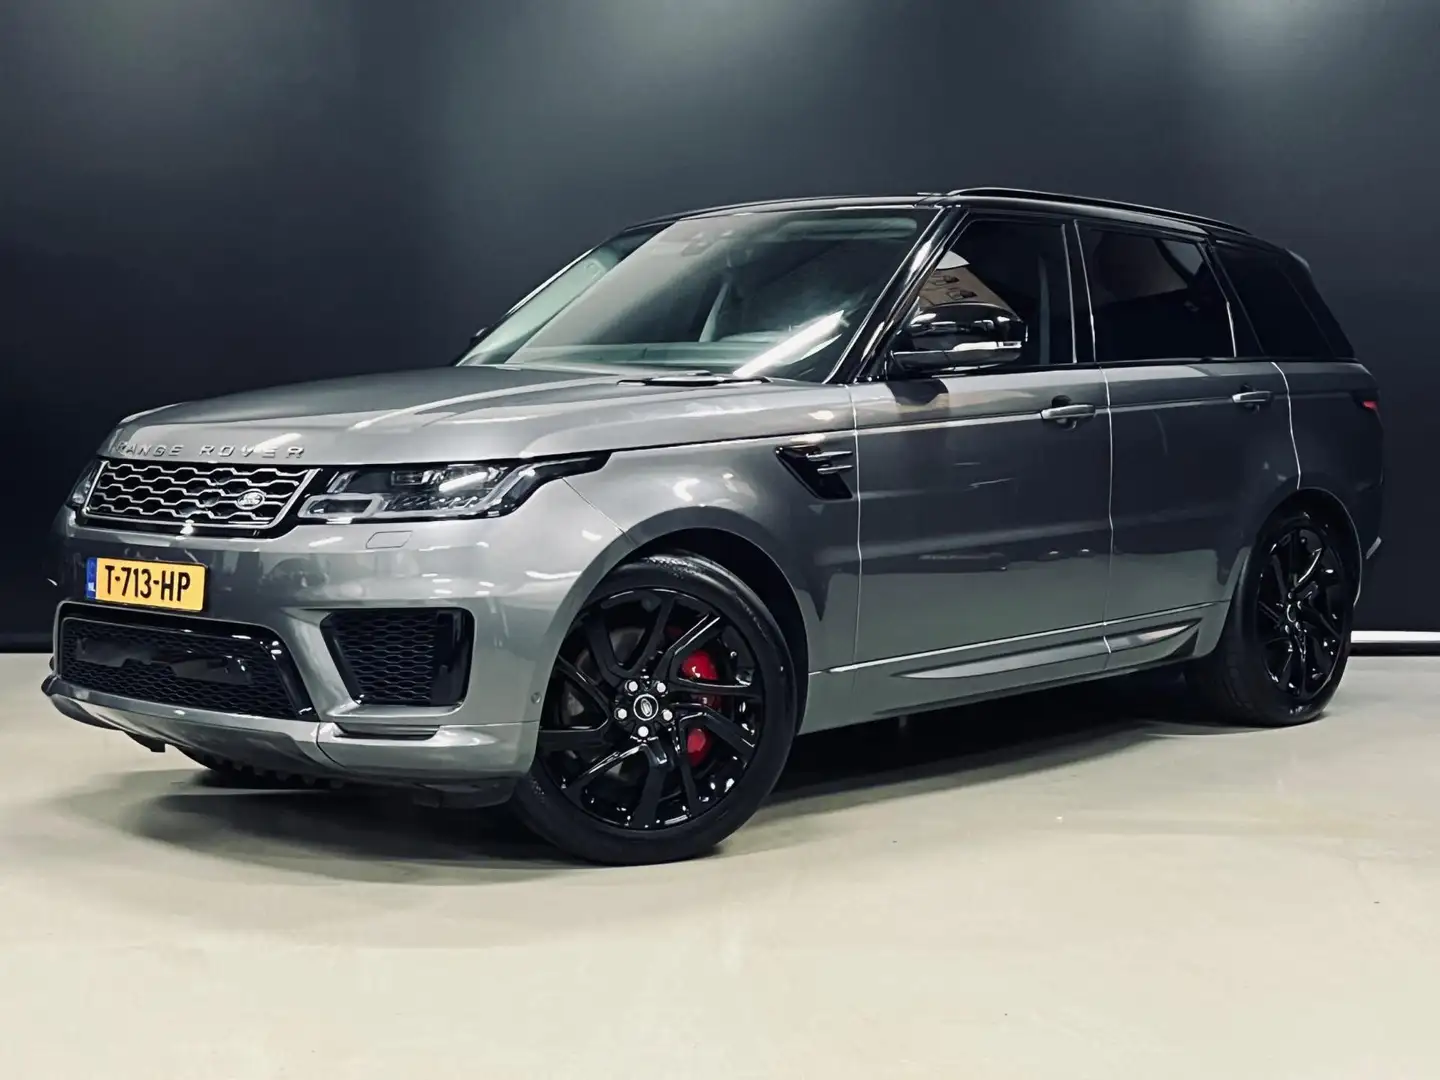 Land Rover Range Rover Sport 2.0 P400e HSE Autobiography Dynamic, Pano, Luchtve siva - 1